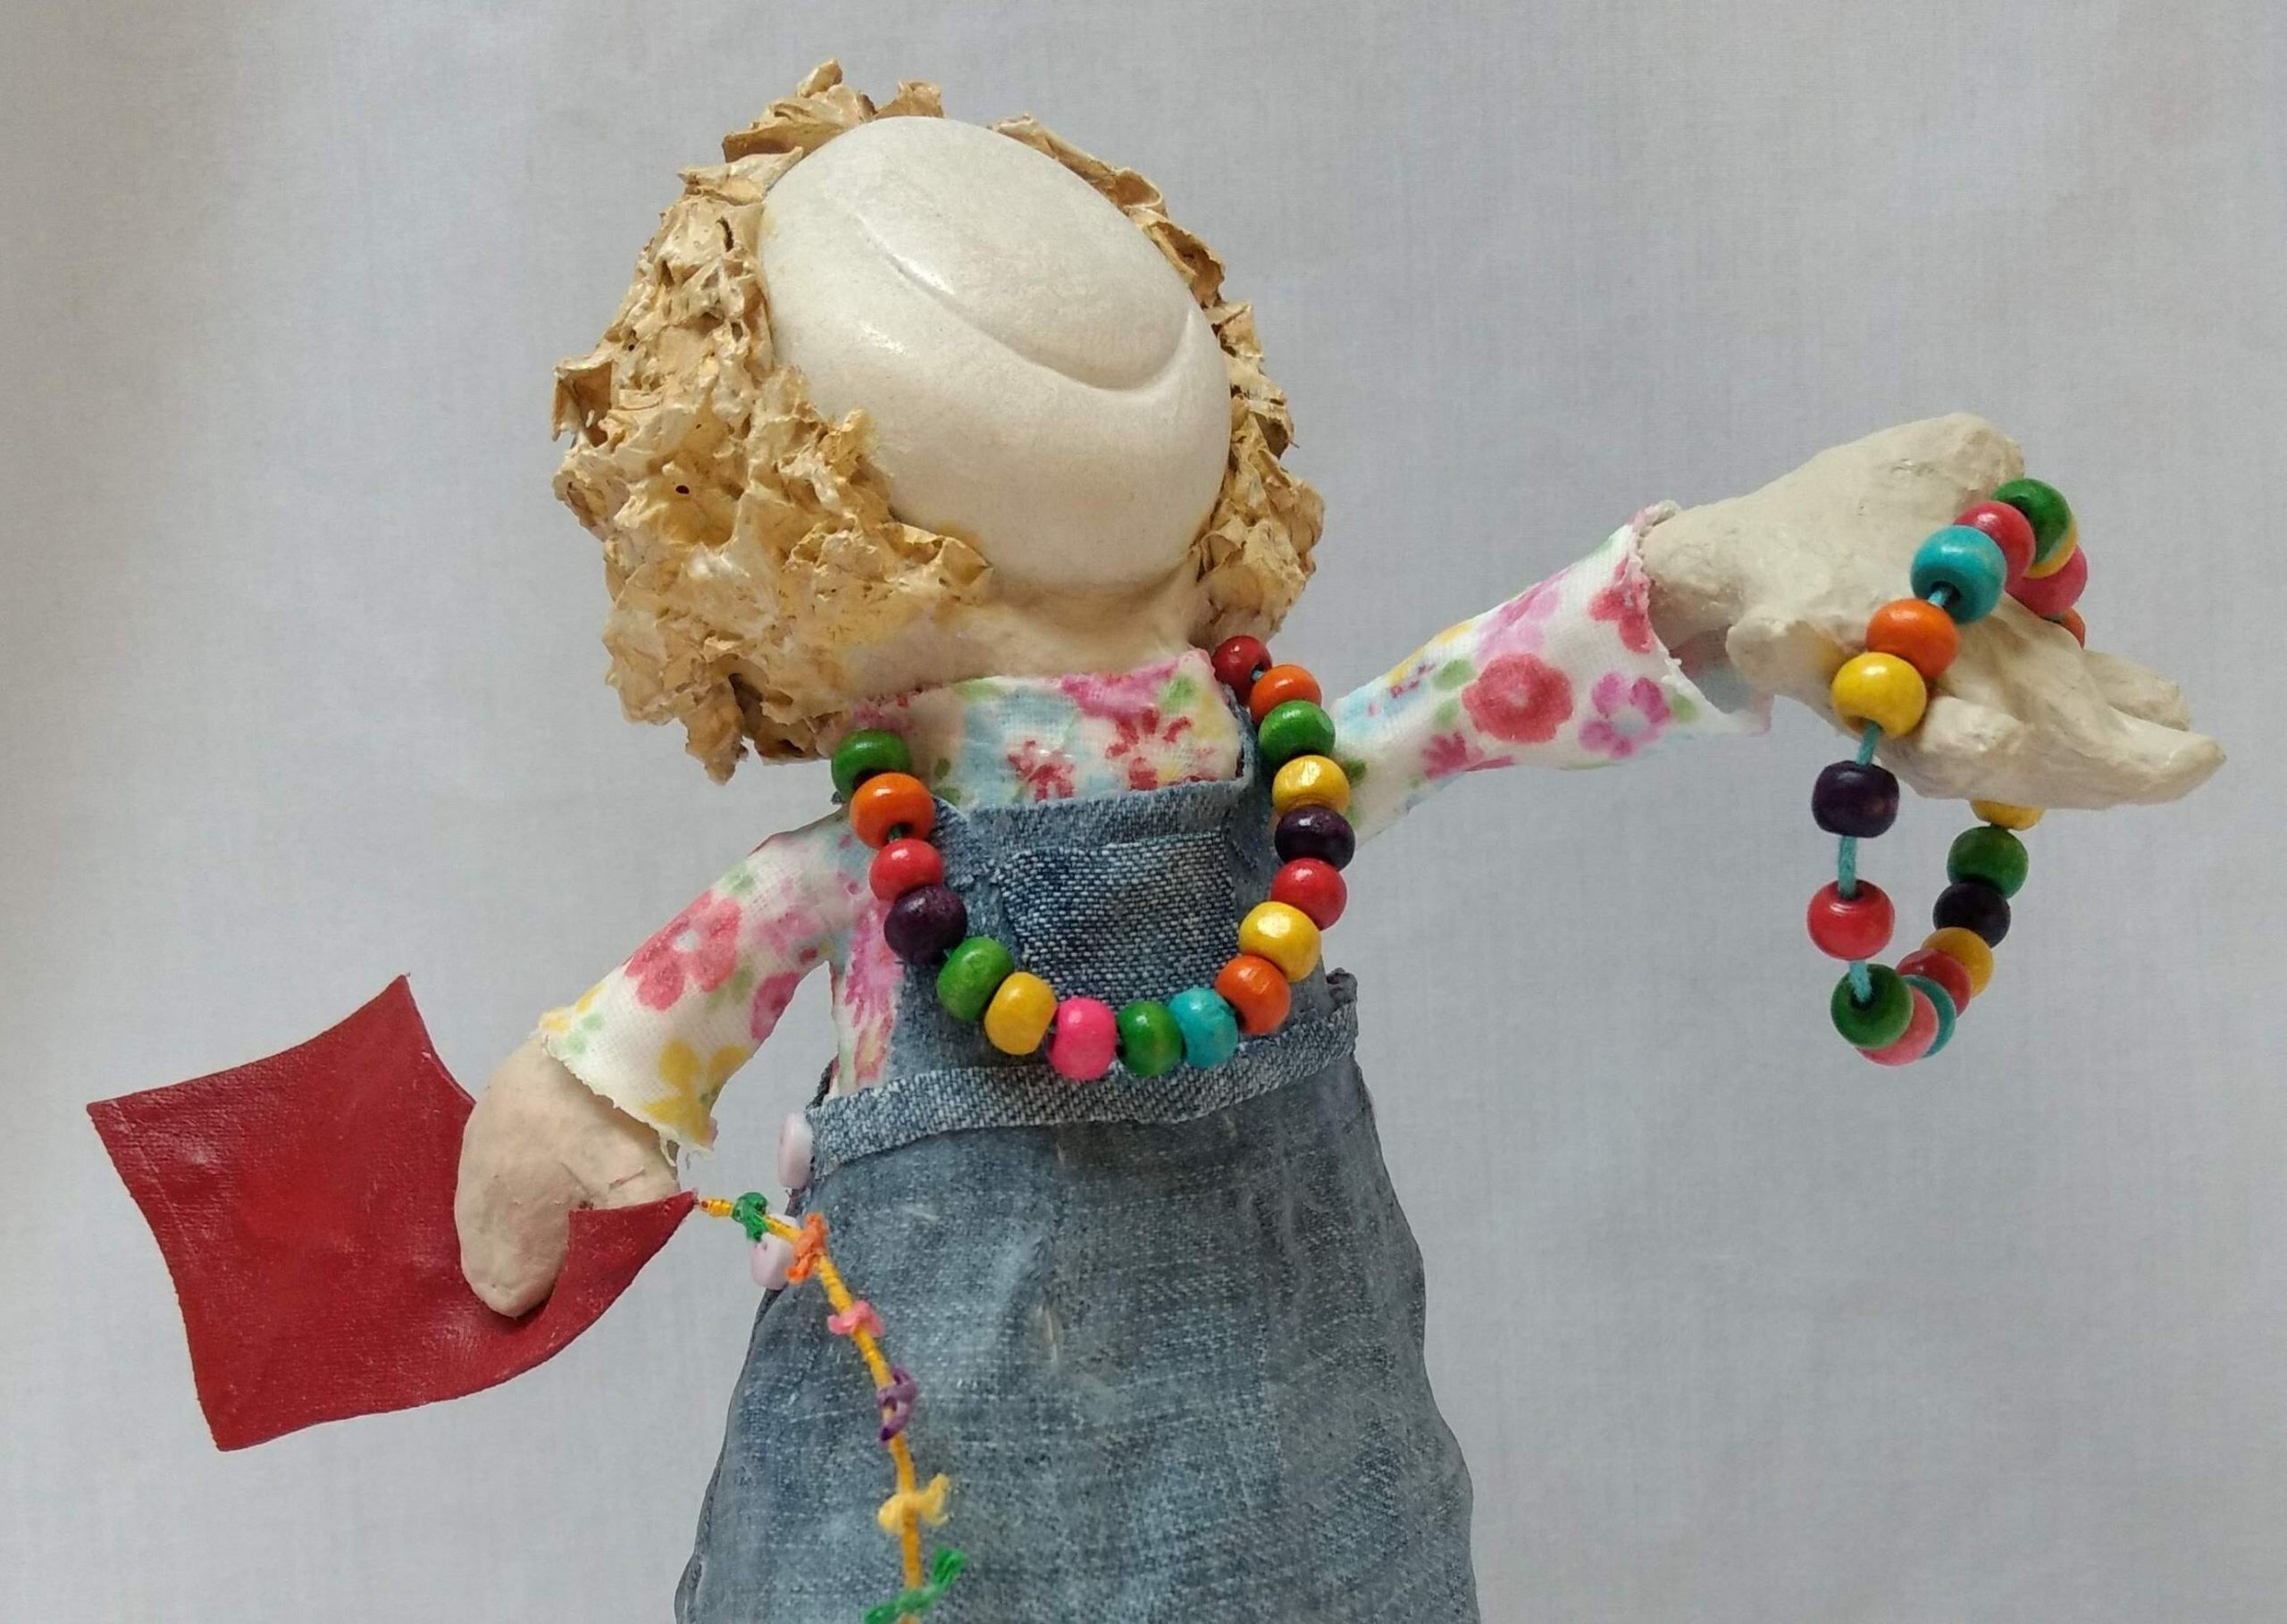 papier mache art doll. a child invites you to play!